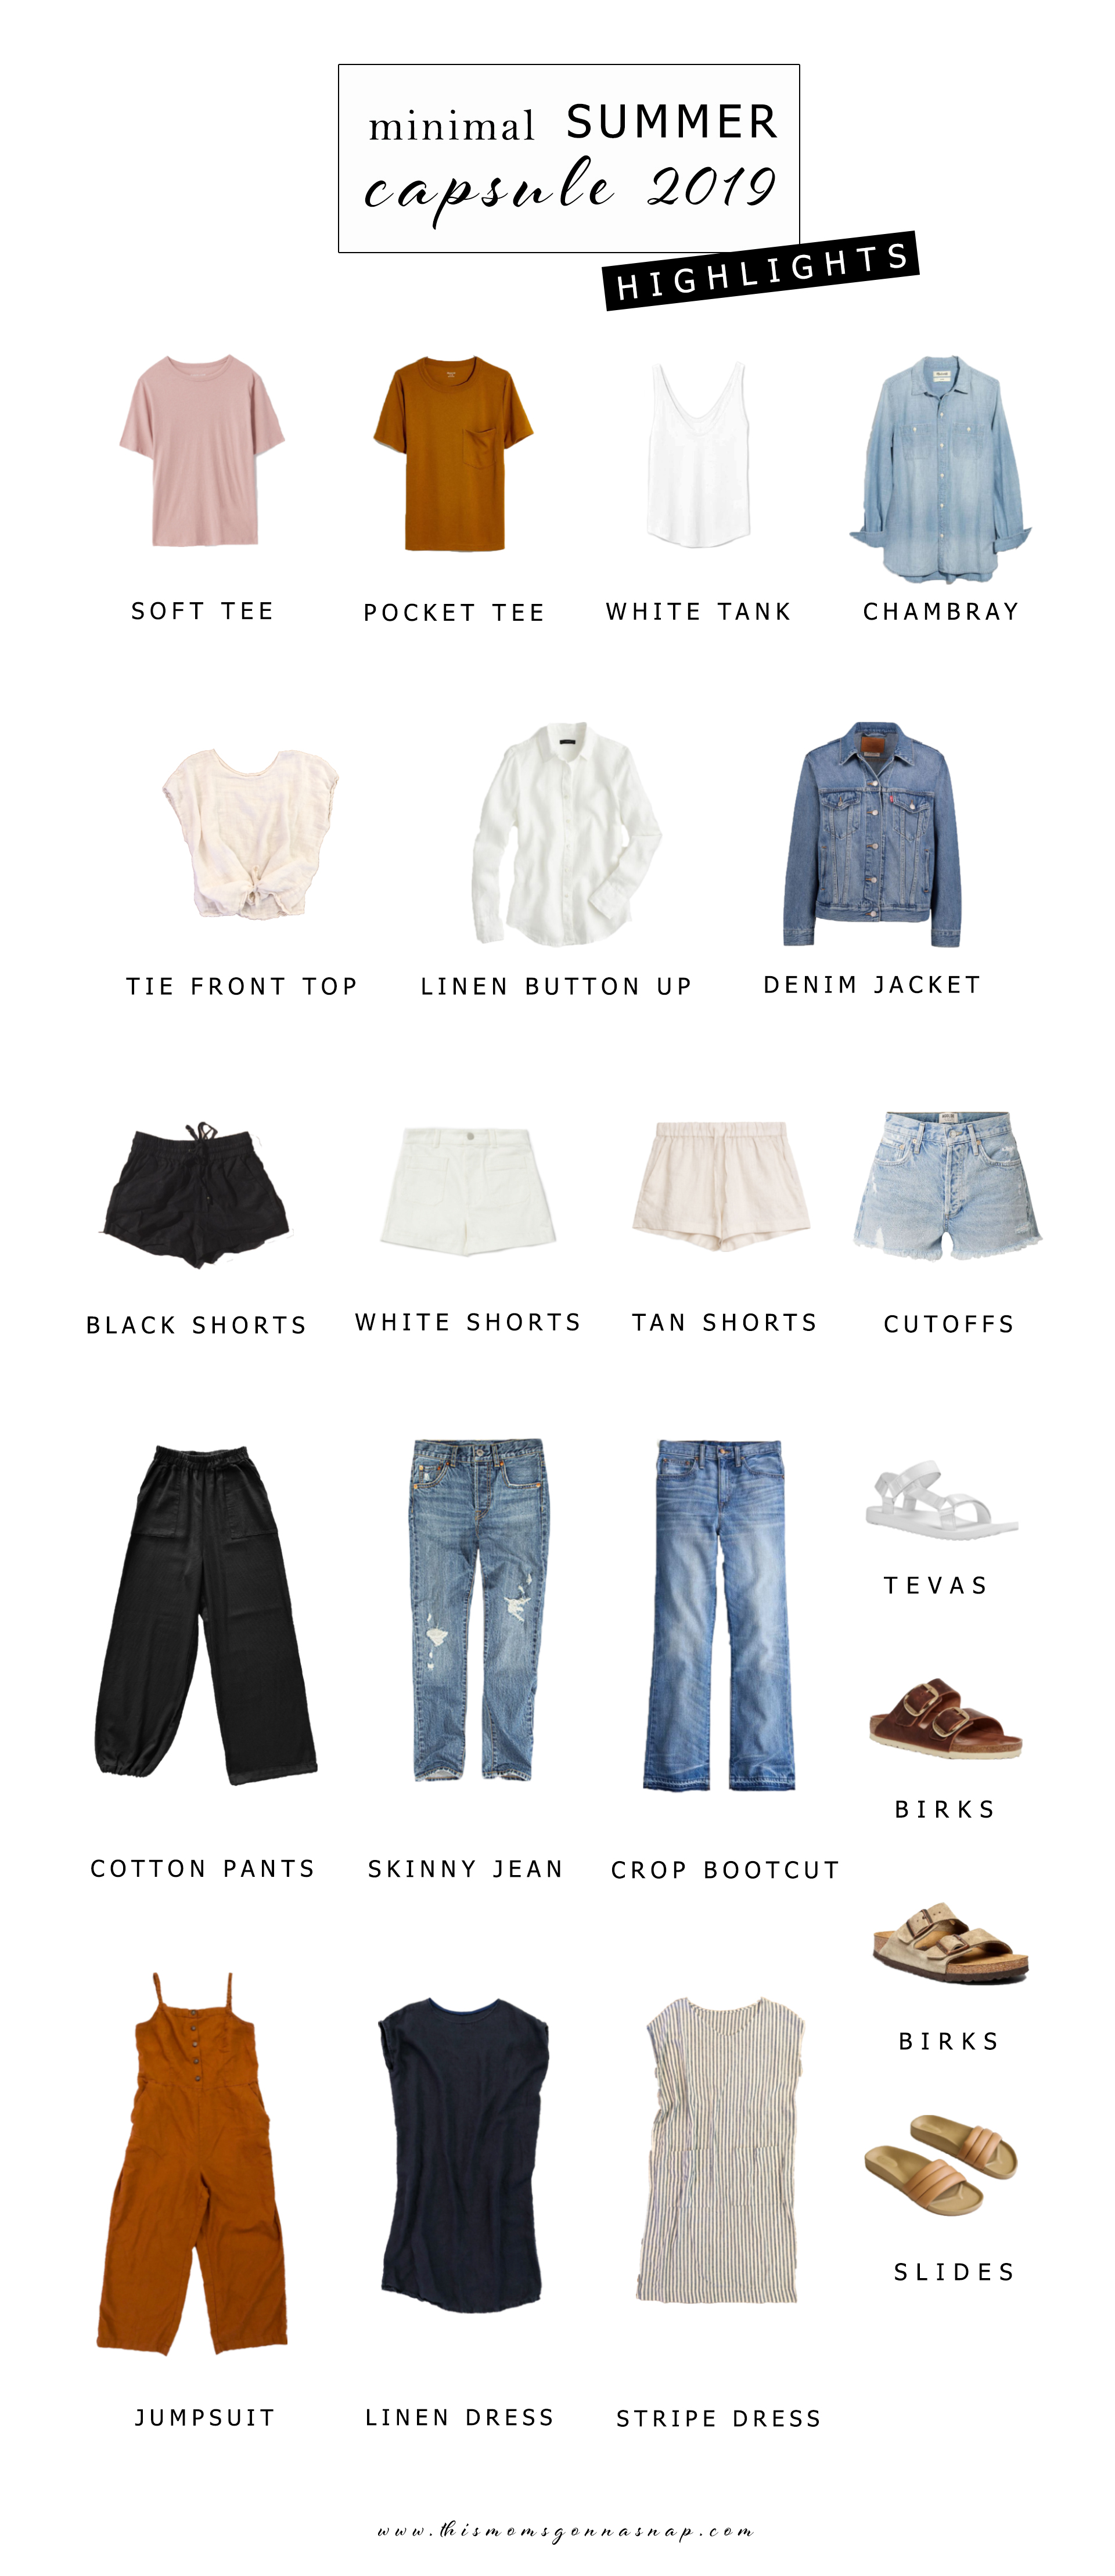 layout of the highlighted items from my summer capsule wardrobe